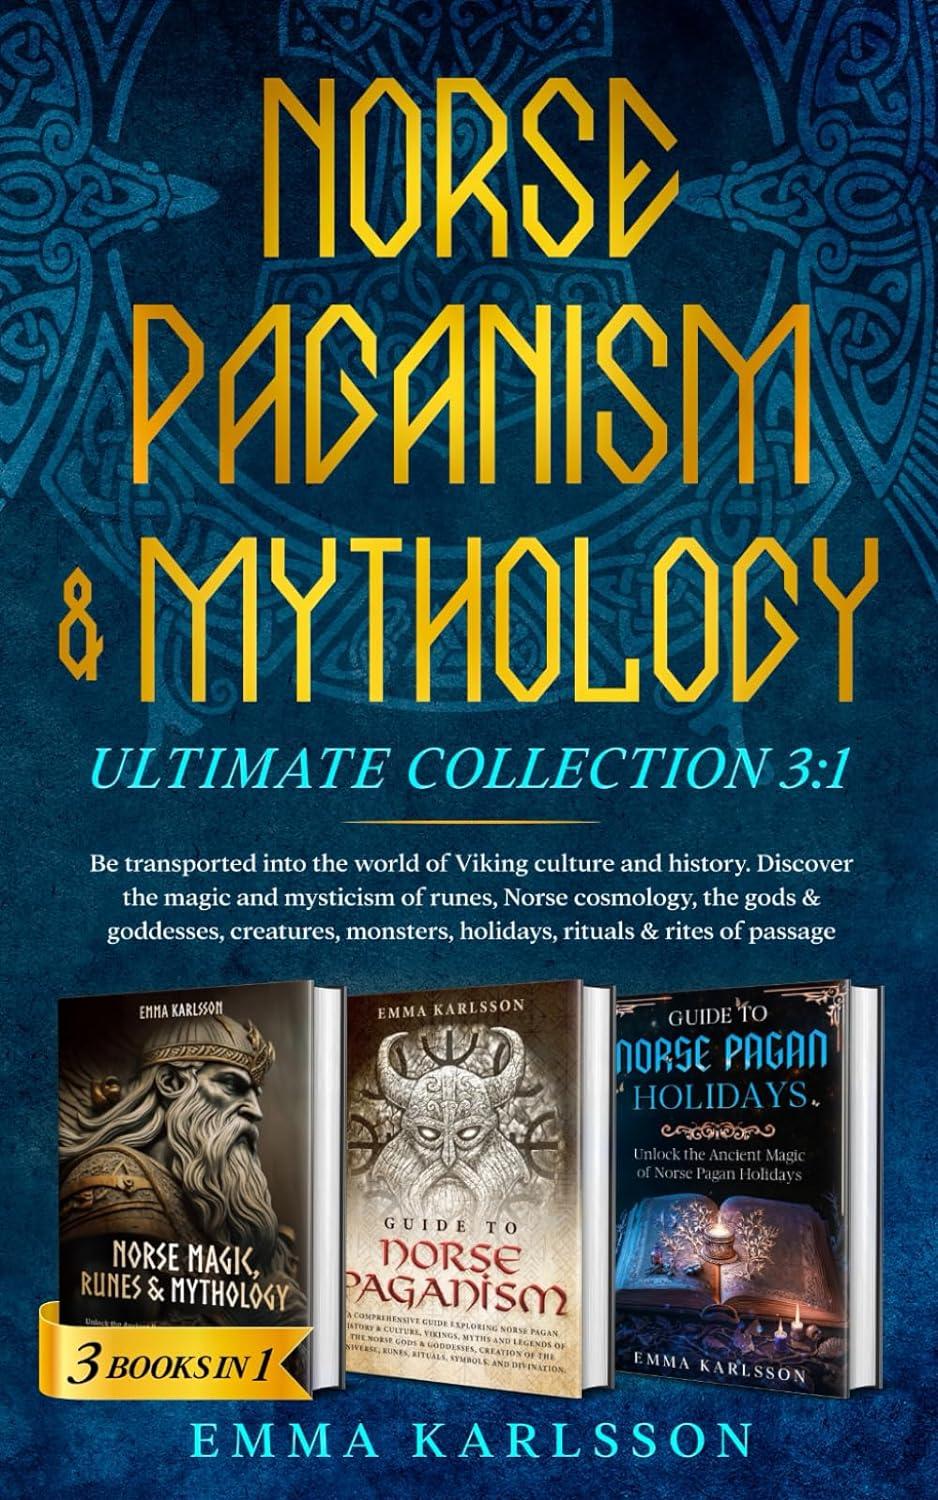 norse paganism and mythology ultimate collection 3:1 1st edition emma karlsson 8863833736, 979-8863833736